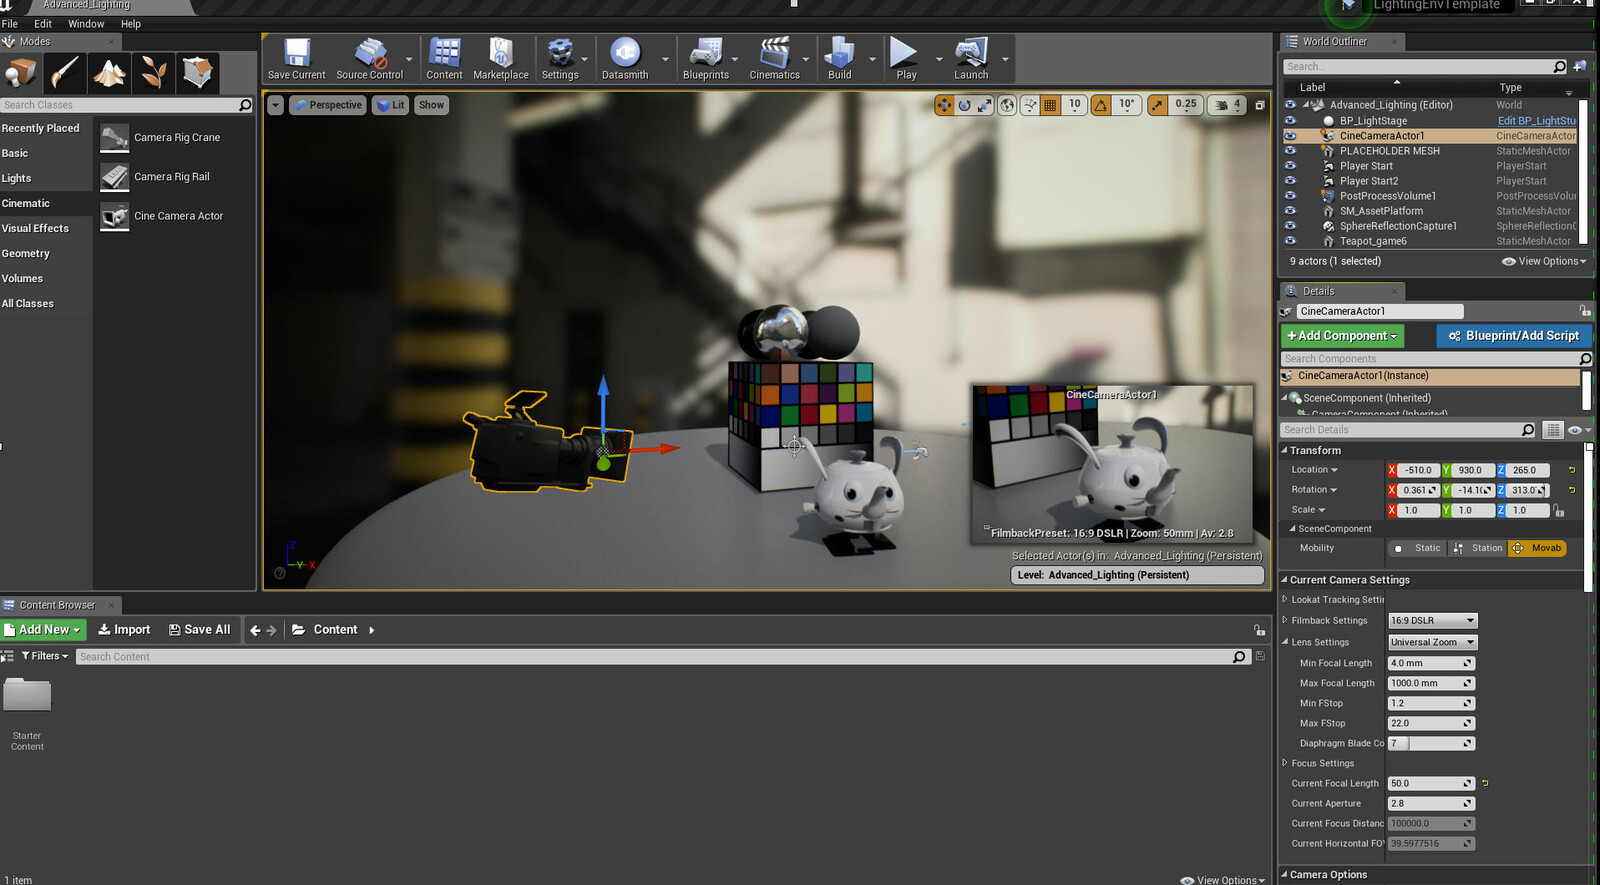 Here is the Teapot model in Unreal.